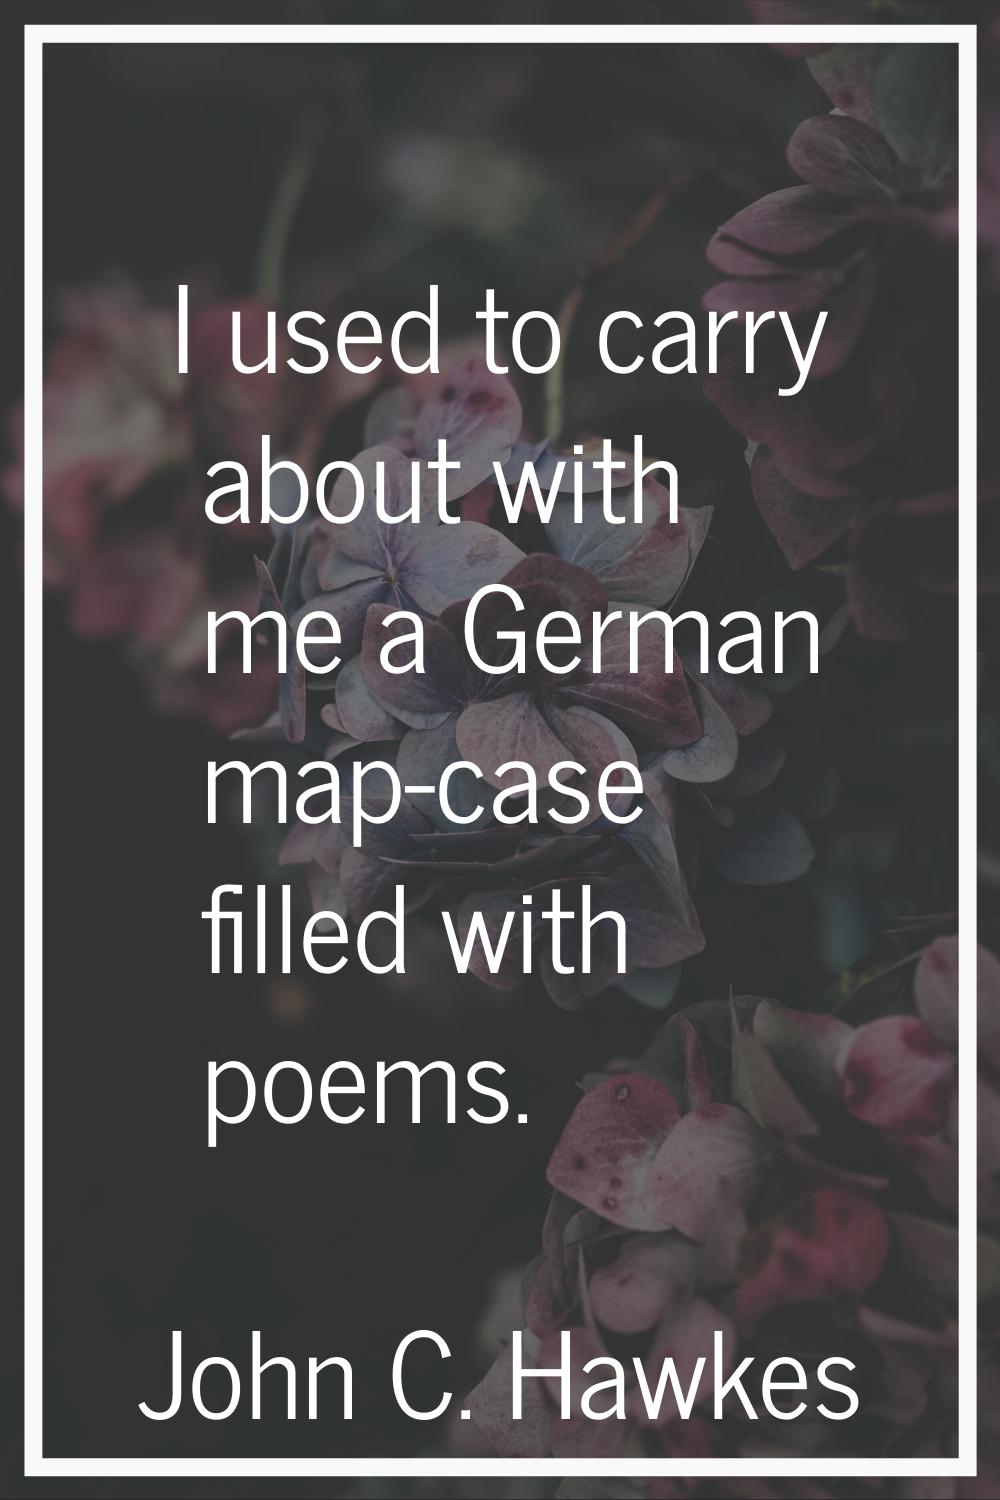 I used to carry about with me a German map-case filled with poems.